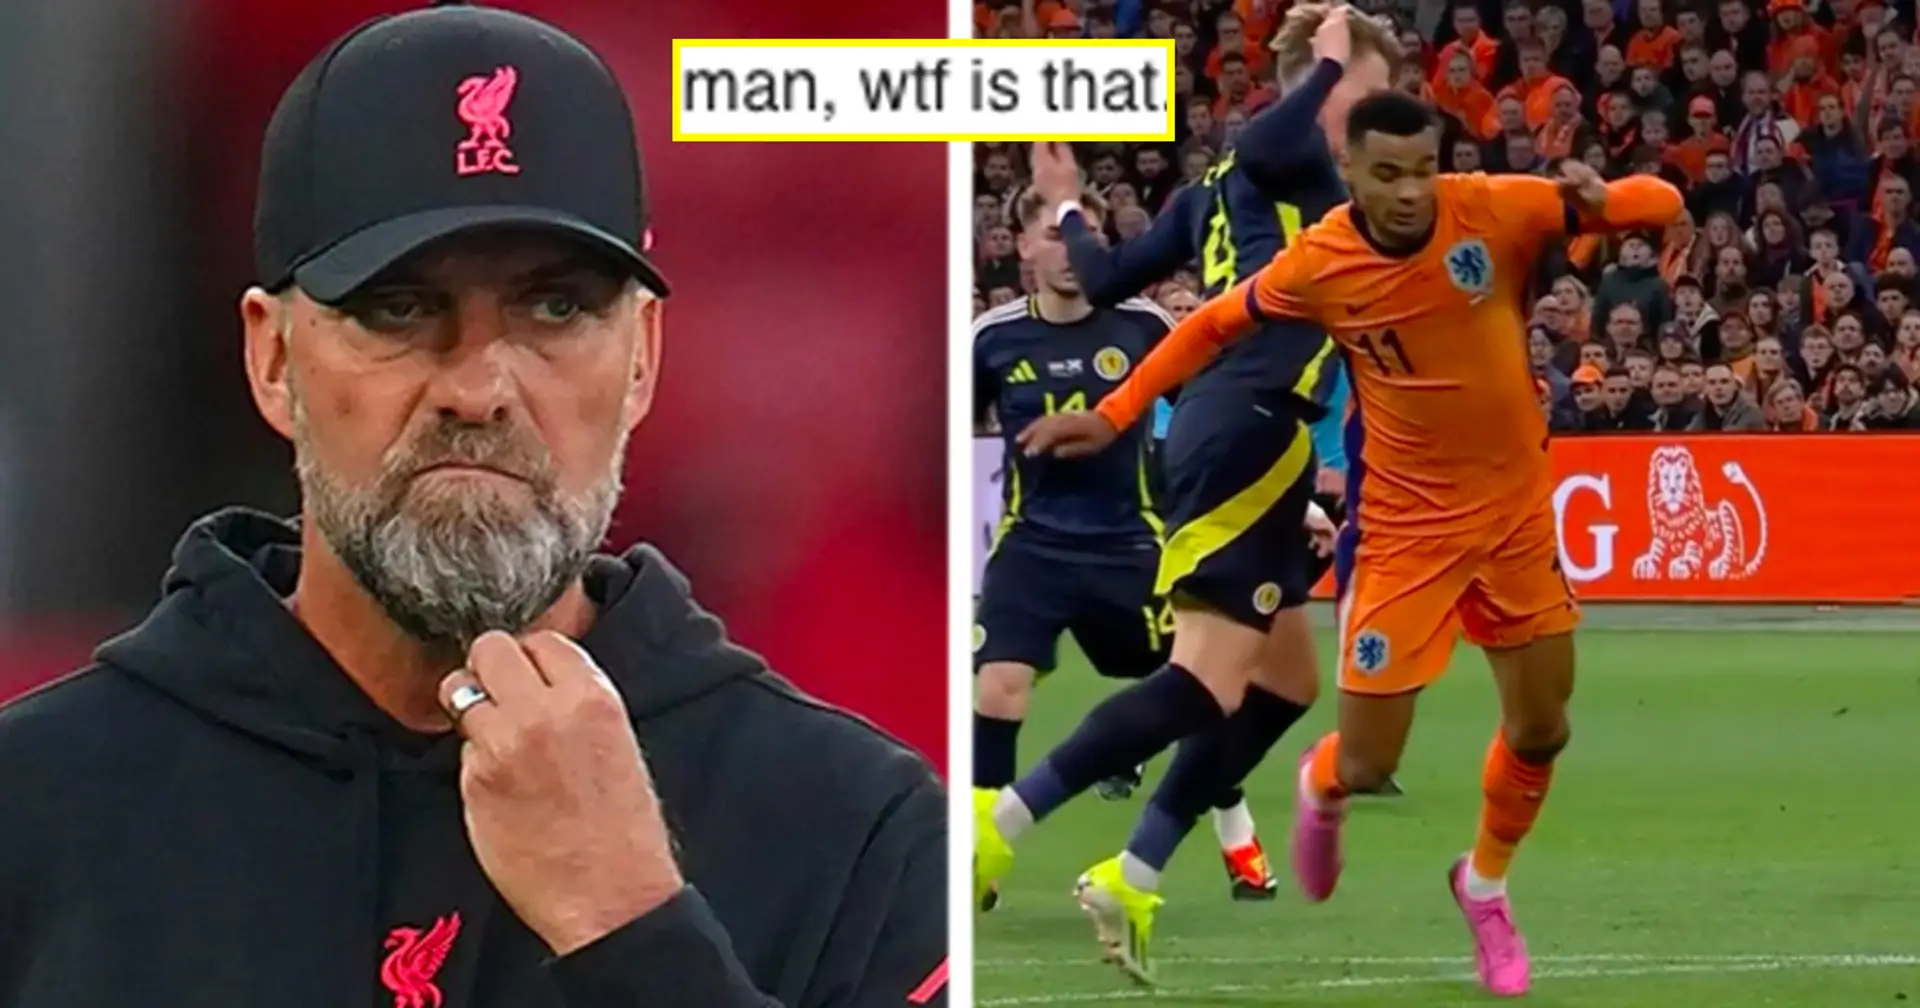 'Klopp would've killed him': Liverpool fans react to Gakpo dive in a friendly